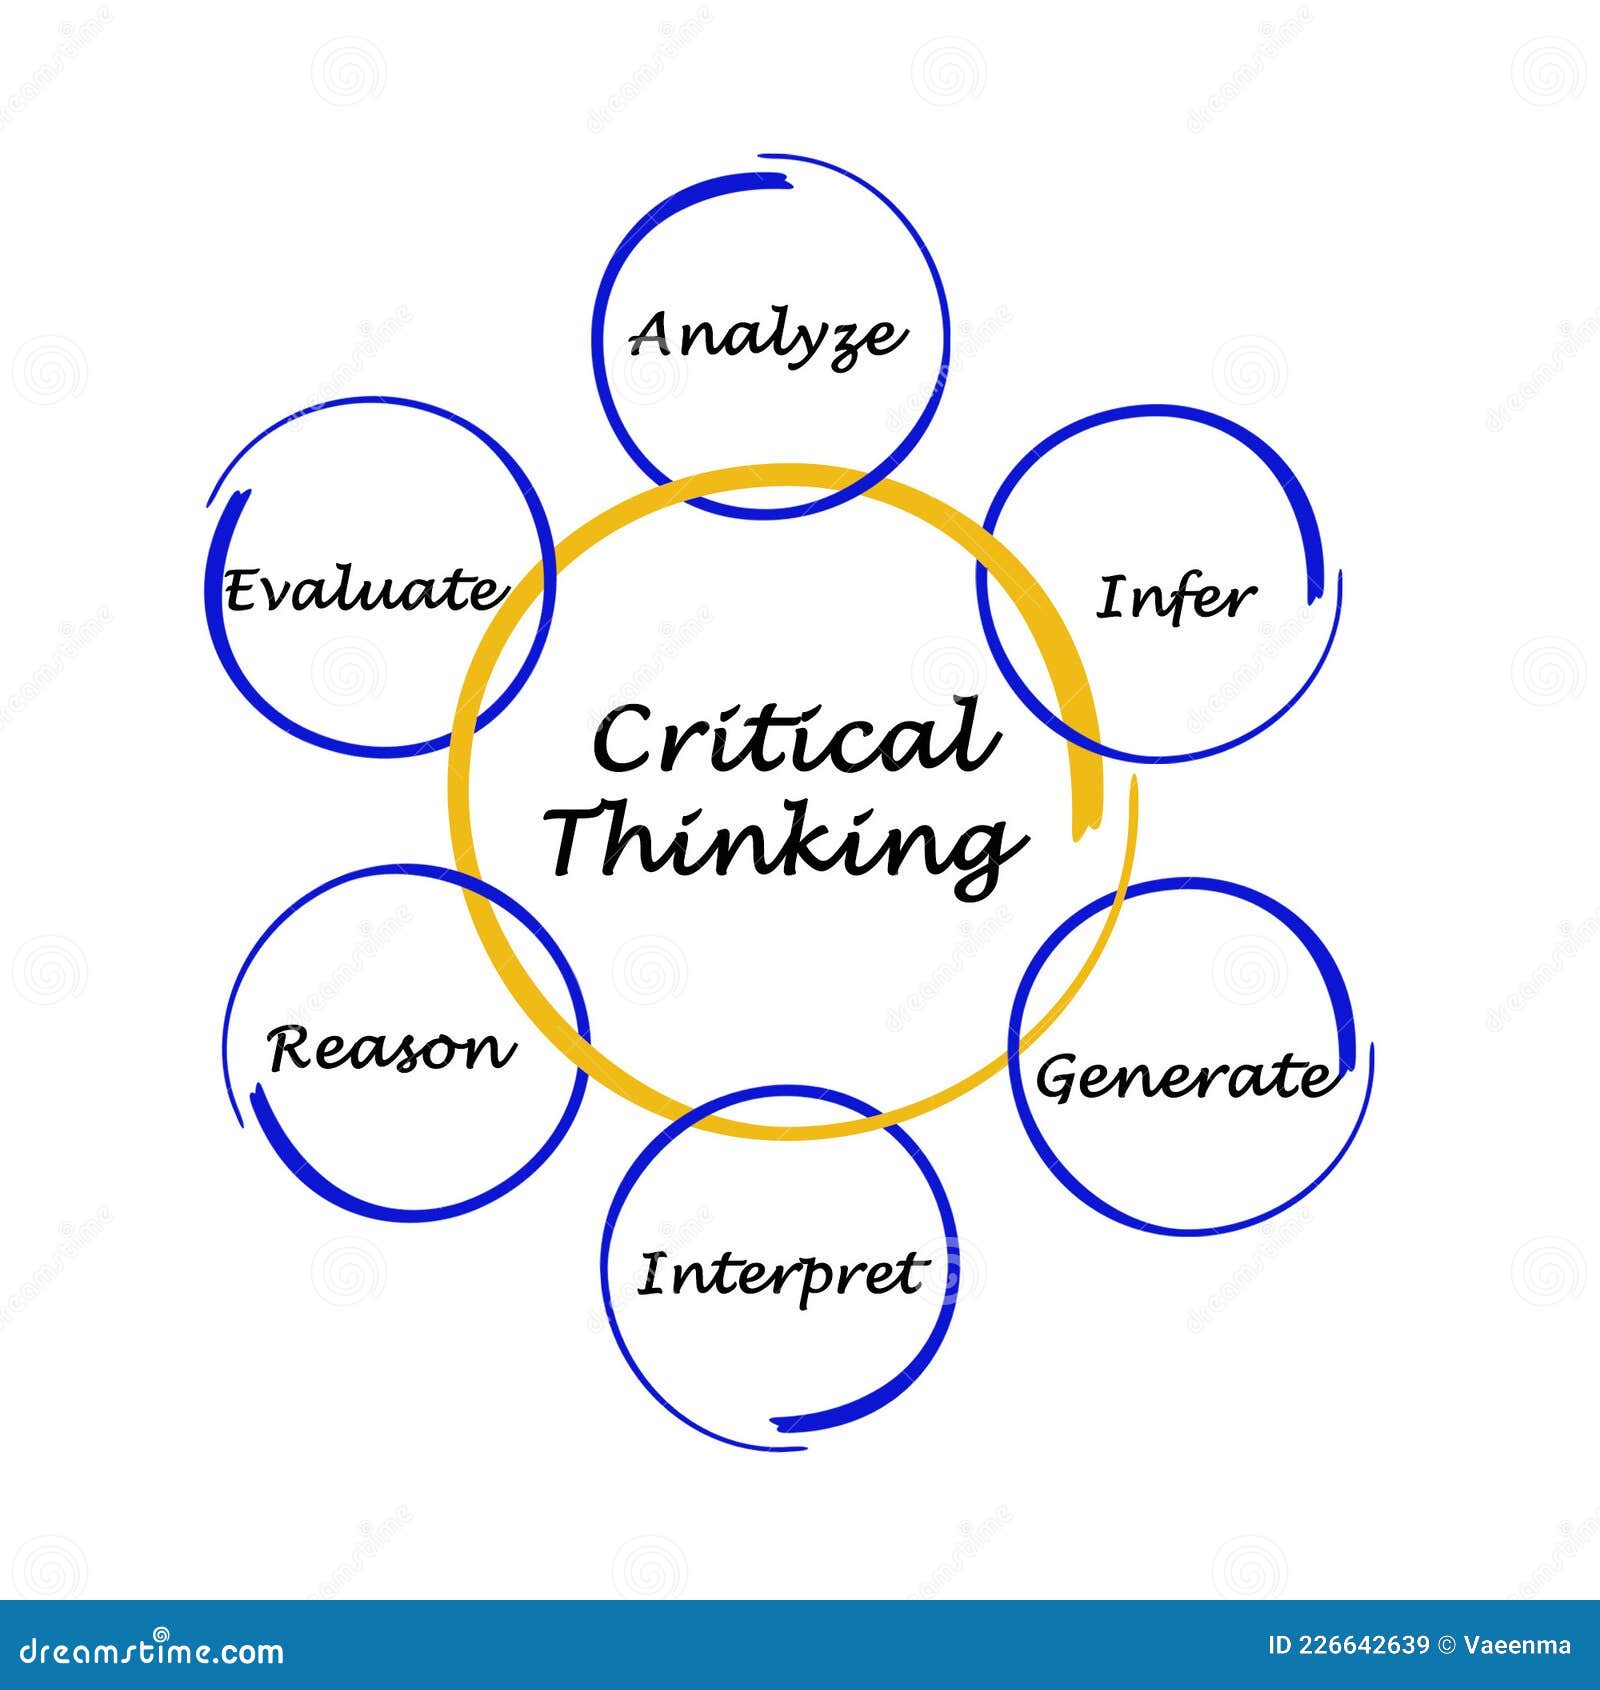 the critical thinking element of information focuses on